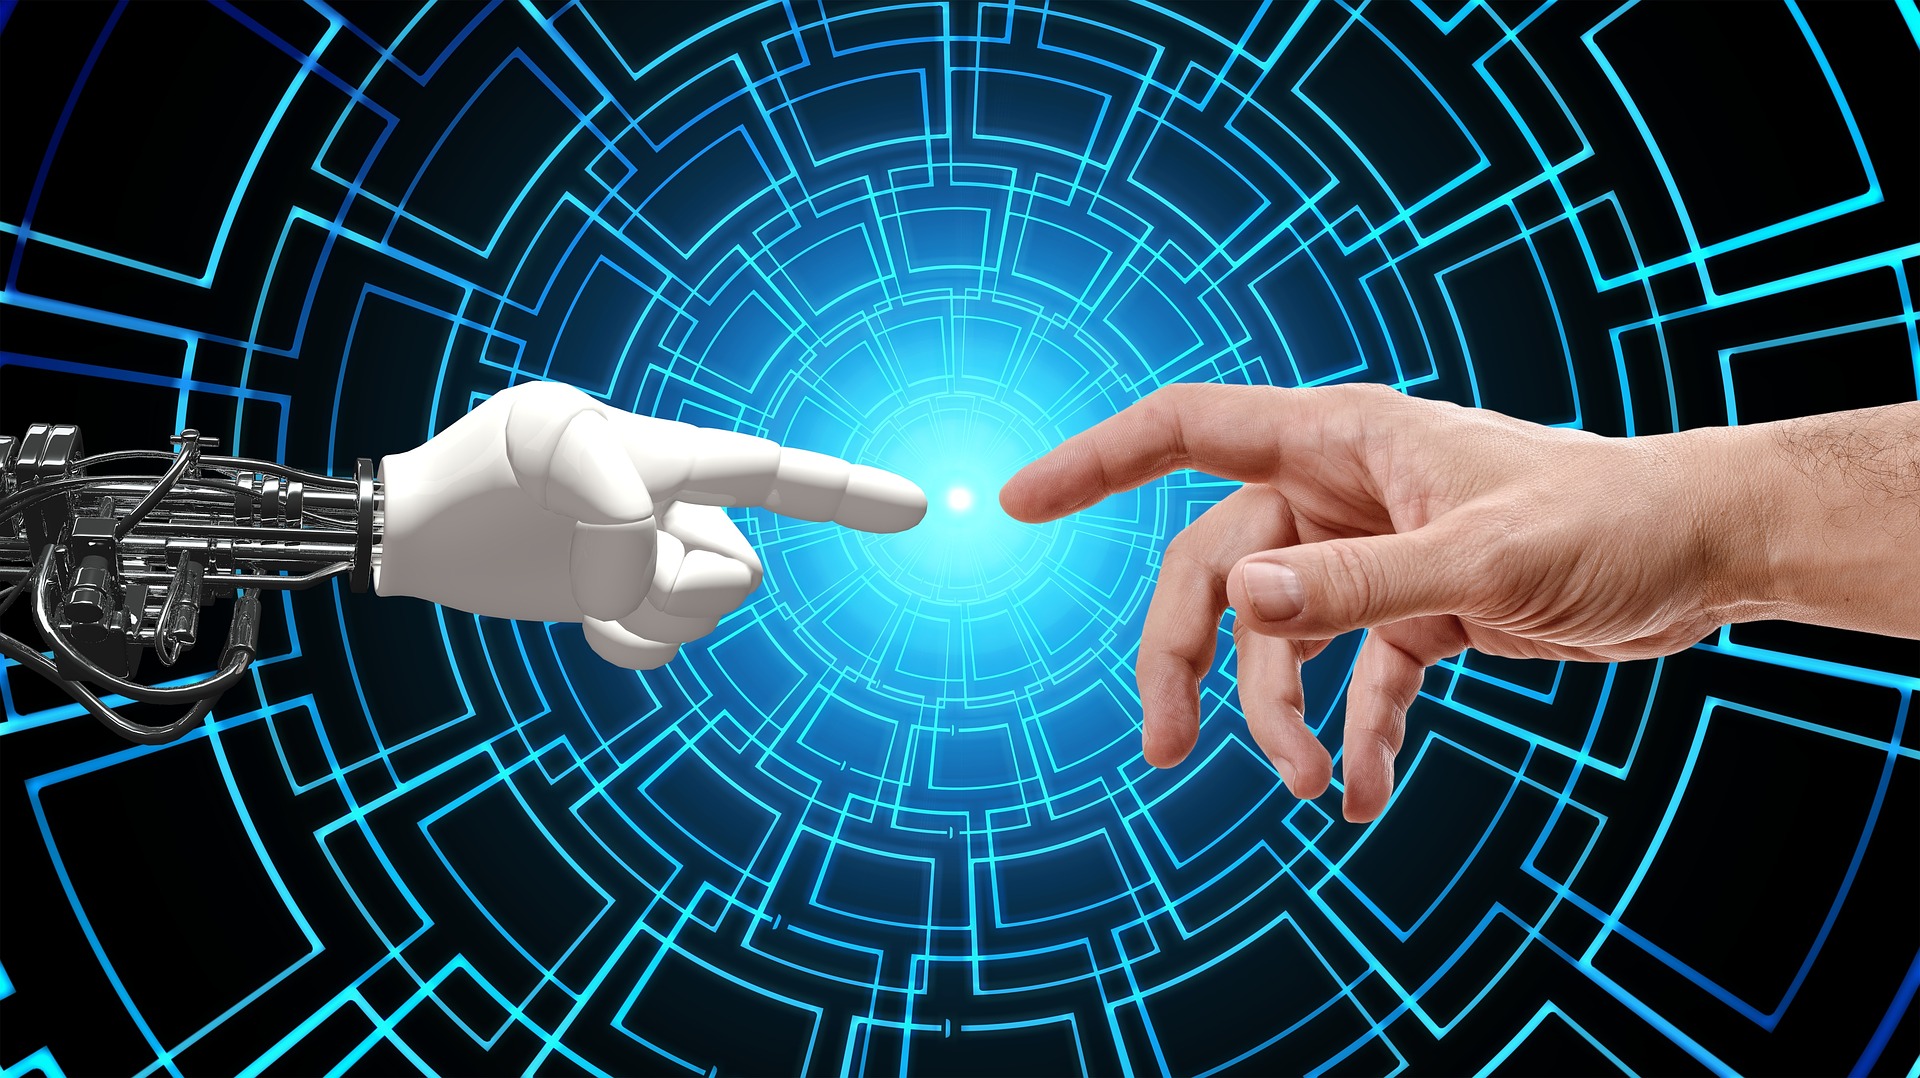 Human and robot hands touching.